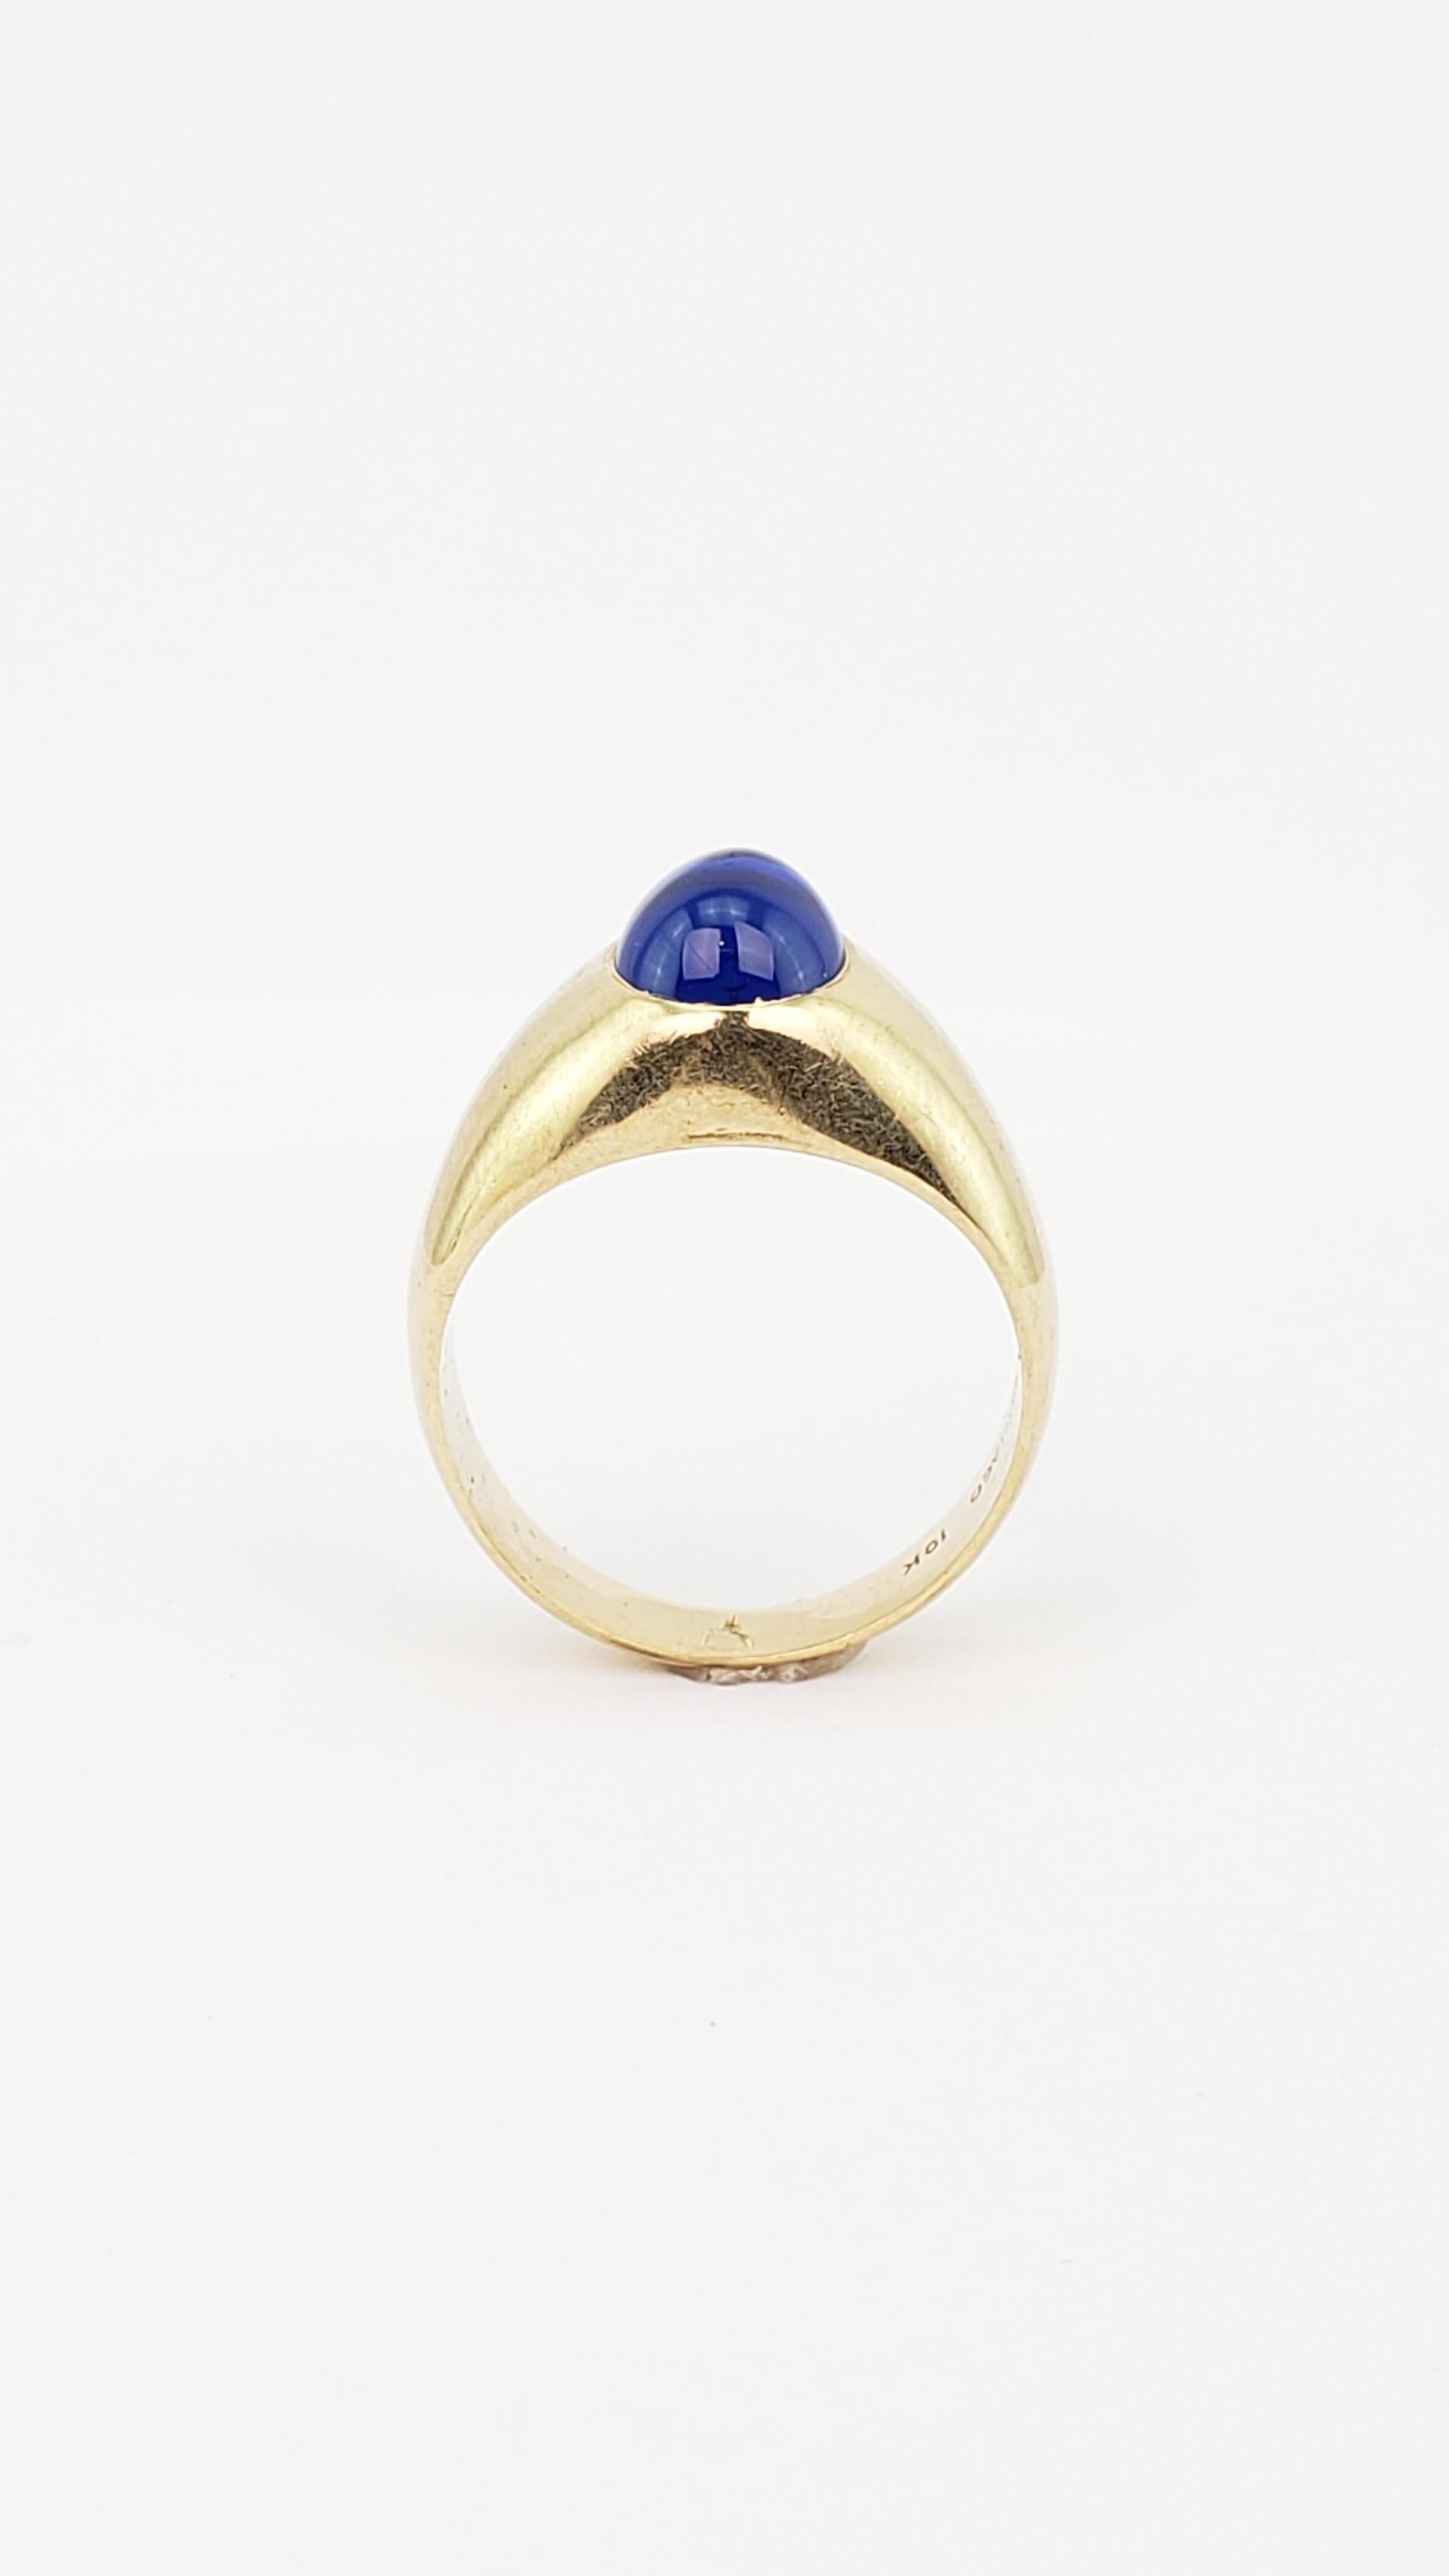 10K Gold Men's or Lady's Ring with Synthetic Blue Sapphire Oval Cabochon 4